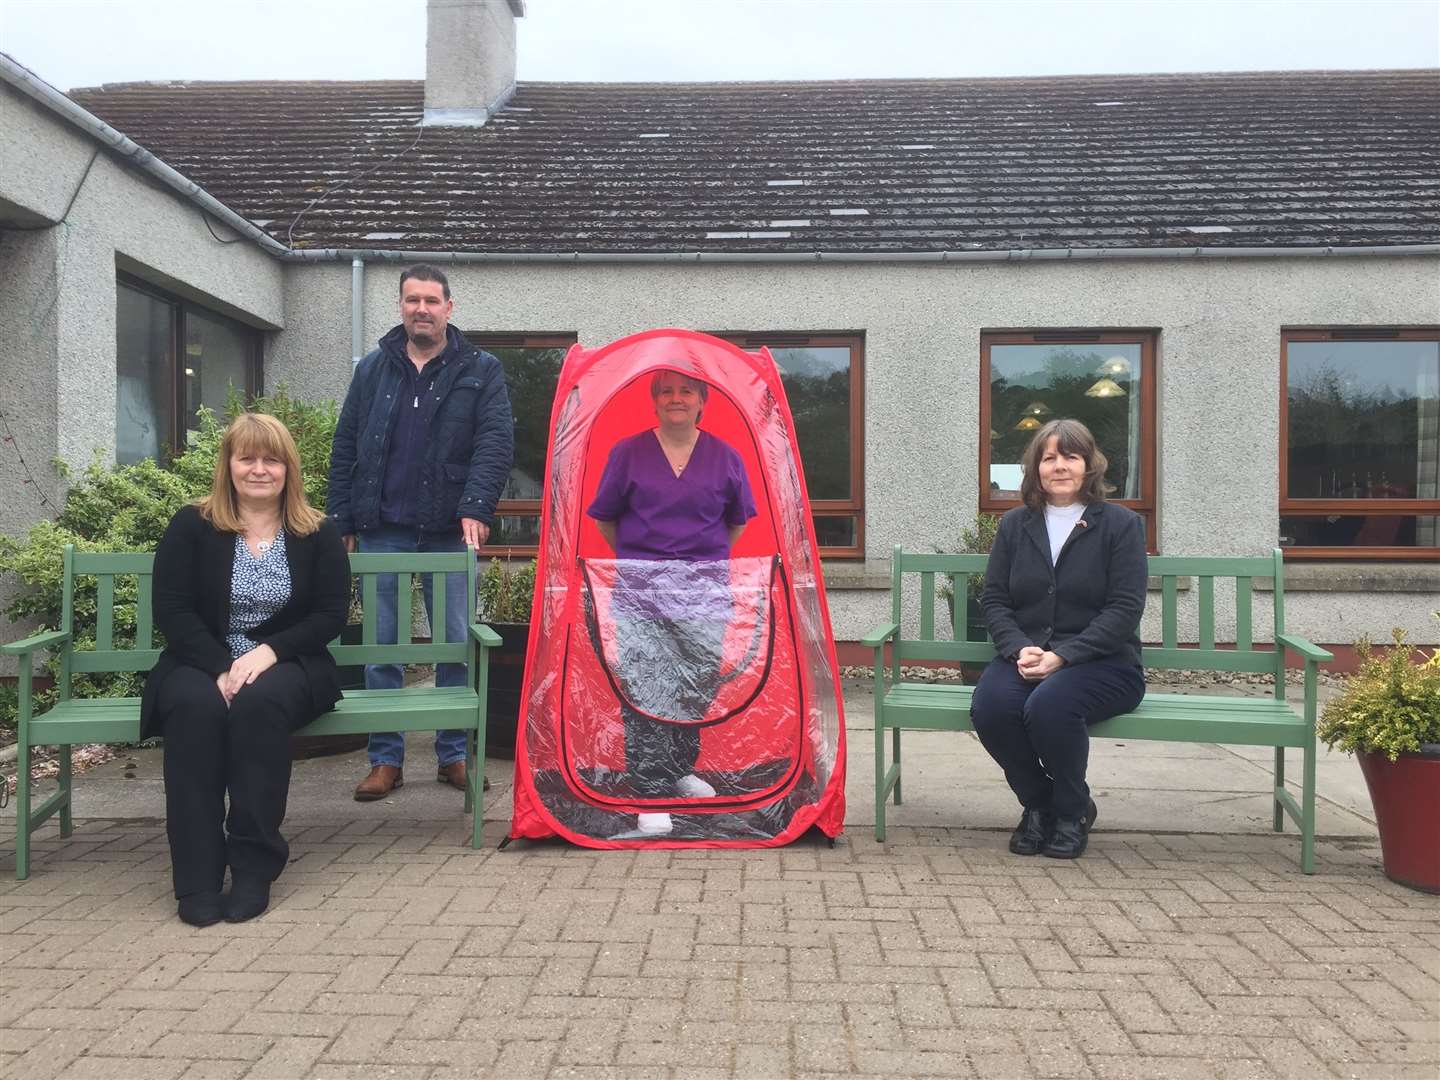 From left: Tina Mitchell, Seaforth House manager; Jamie Sinclair, community payback officer; Tracey Campbell, Seaforth House social care worker; and Christine Ross, Kilbraur Wind Farm Community Benefit Trust.